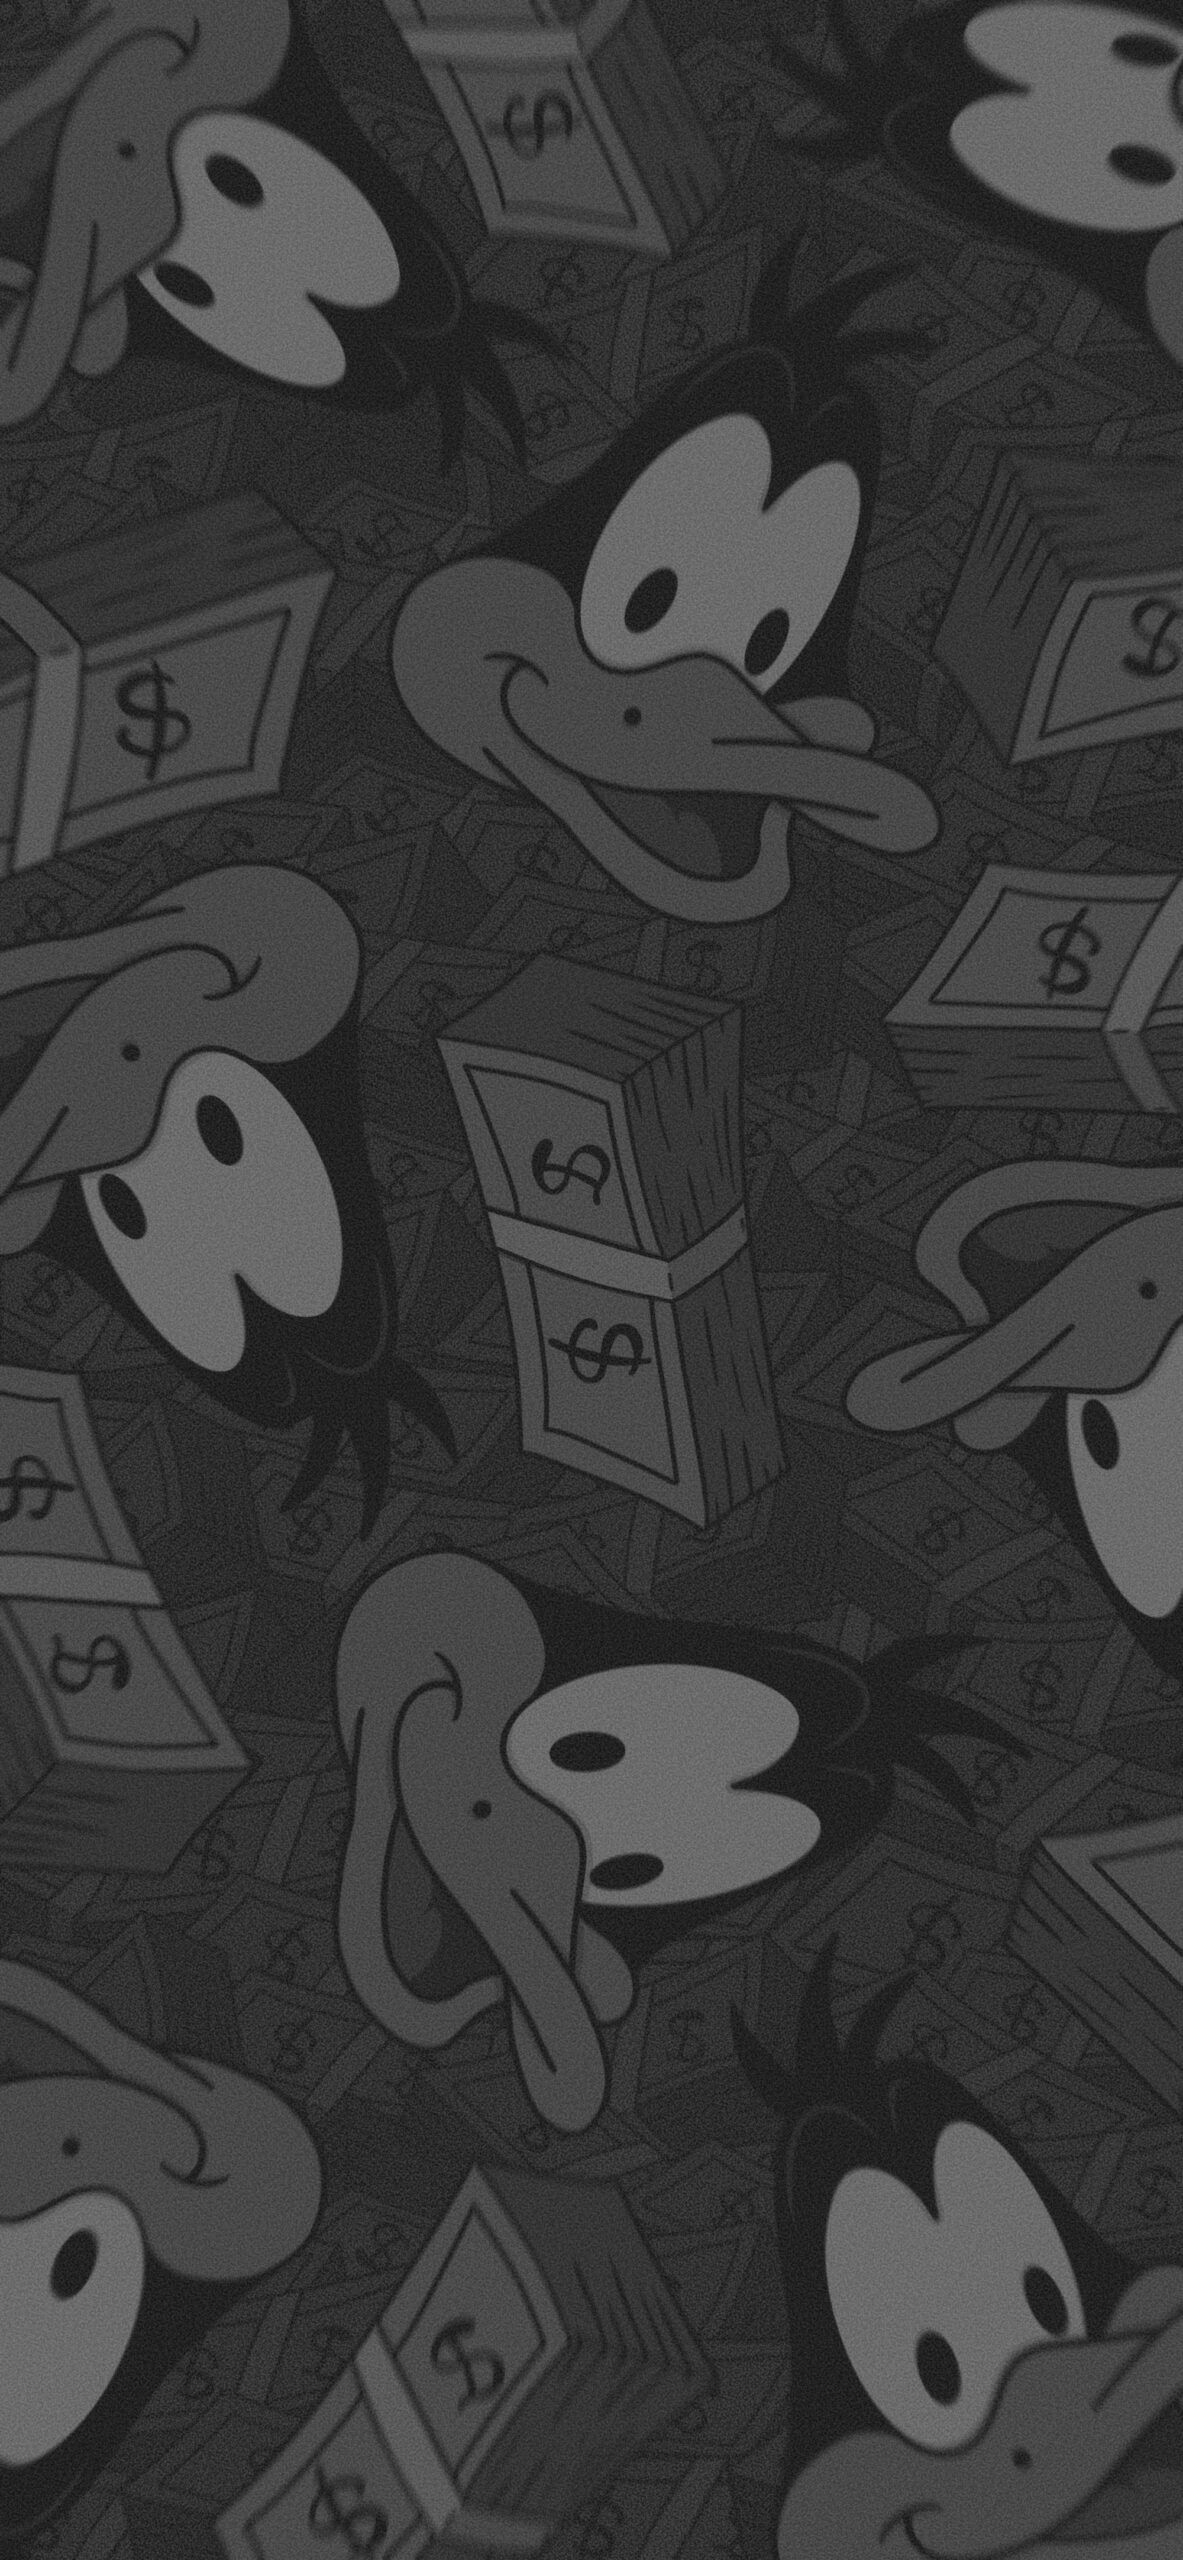 Iphone wallpaper of a black and white cartoon character surrounded by money - Money, duck, Looney Tunes